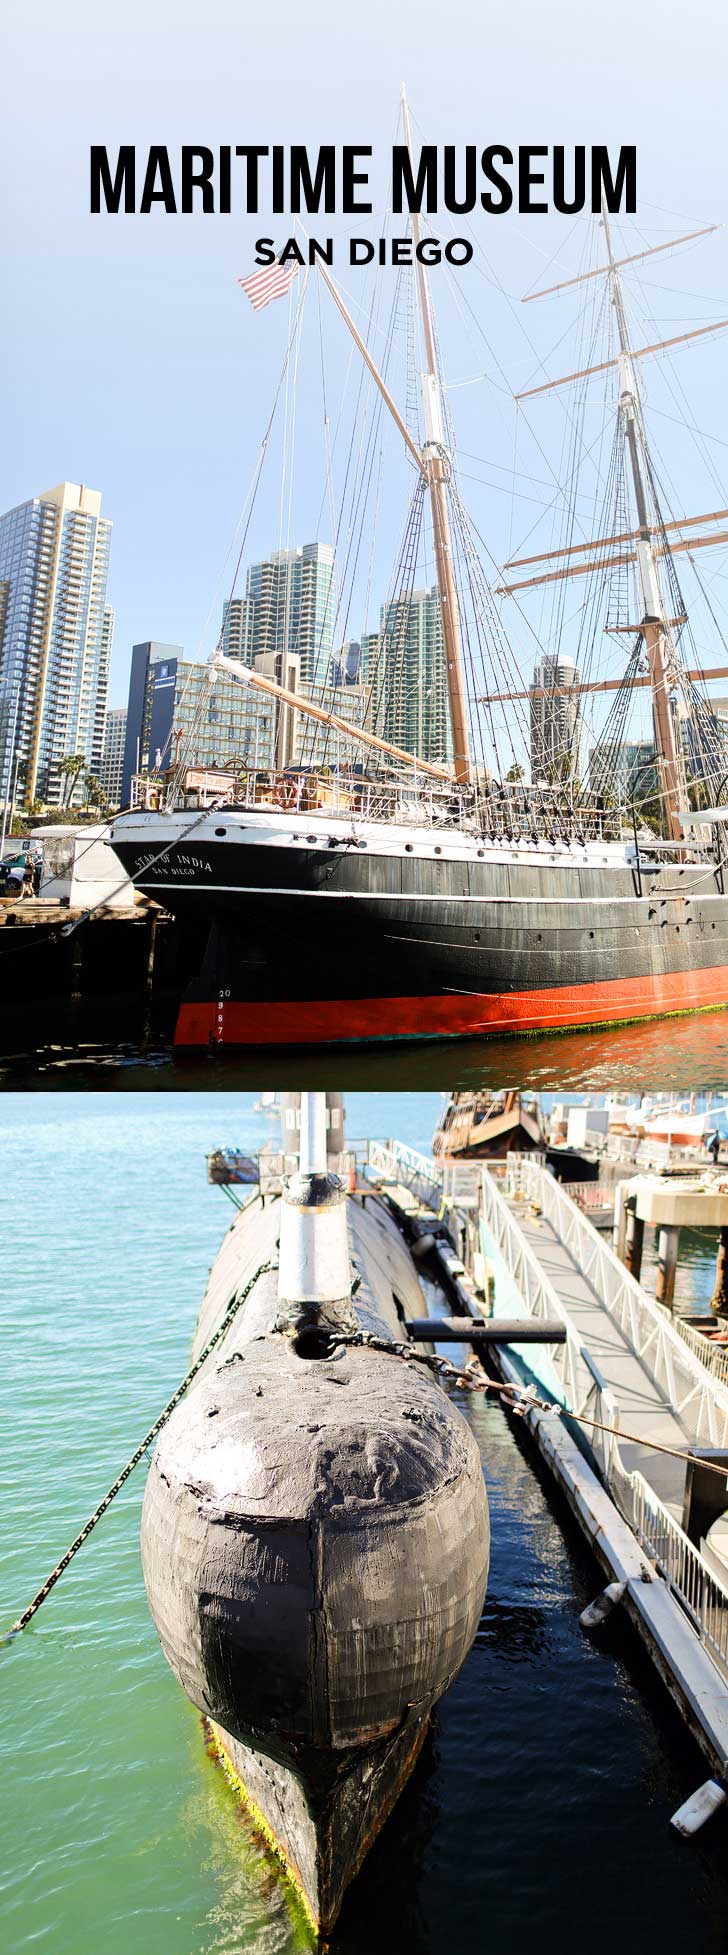 Tour of the Maritime Museum of San Diego, which has one of the largest collections of historic sea vessels in the United States // localadventurer.com